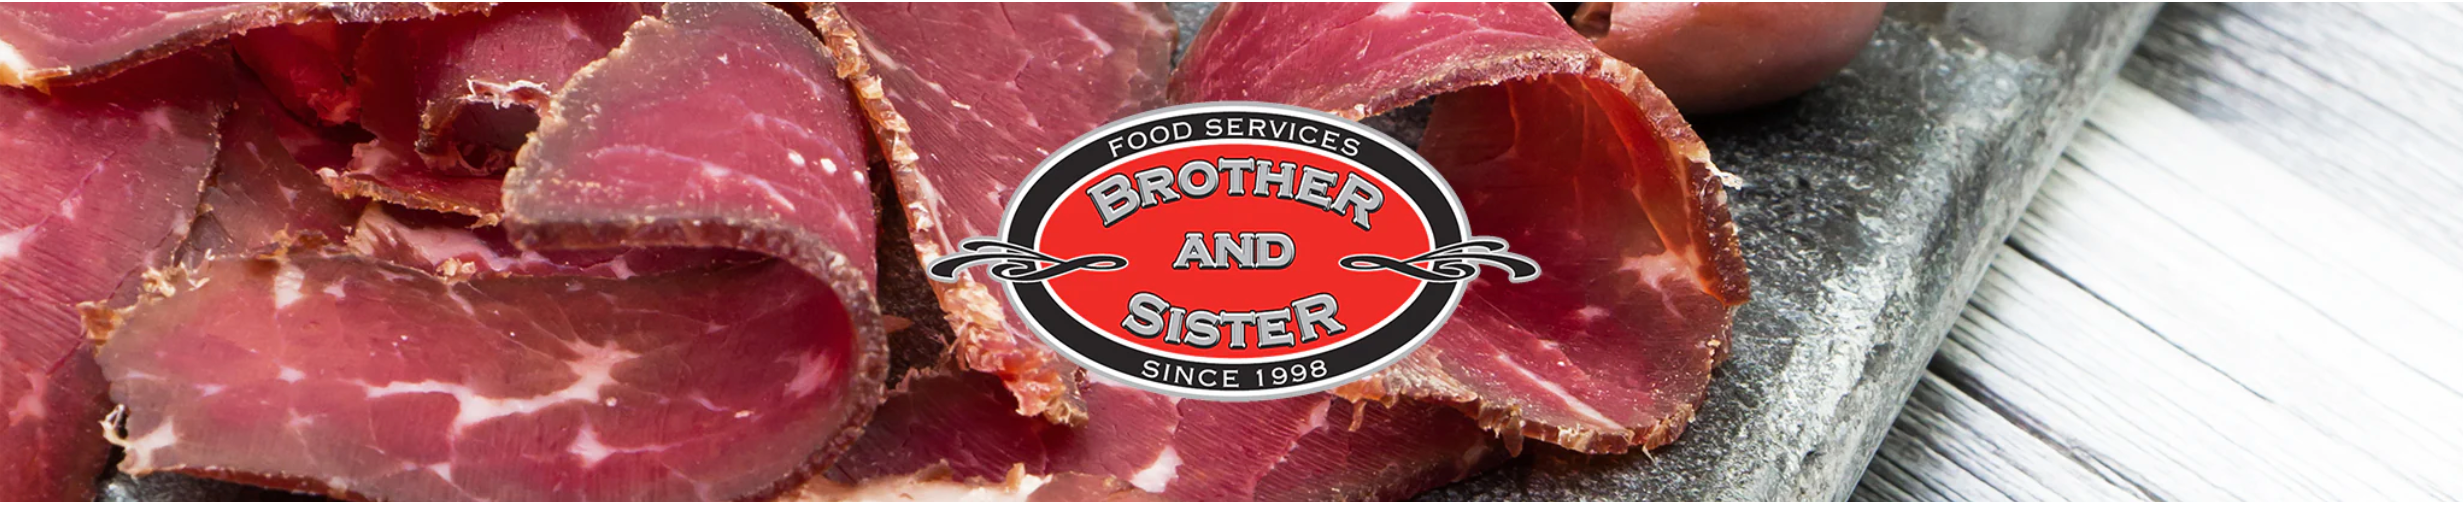 Brother & Sister Meats - Global Imports & Exports Wholesale